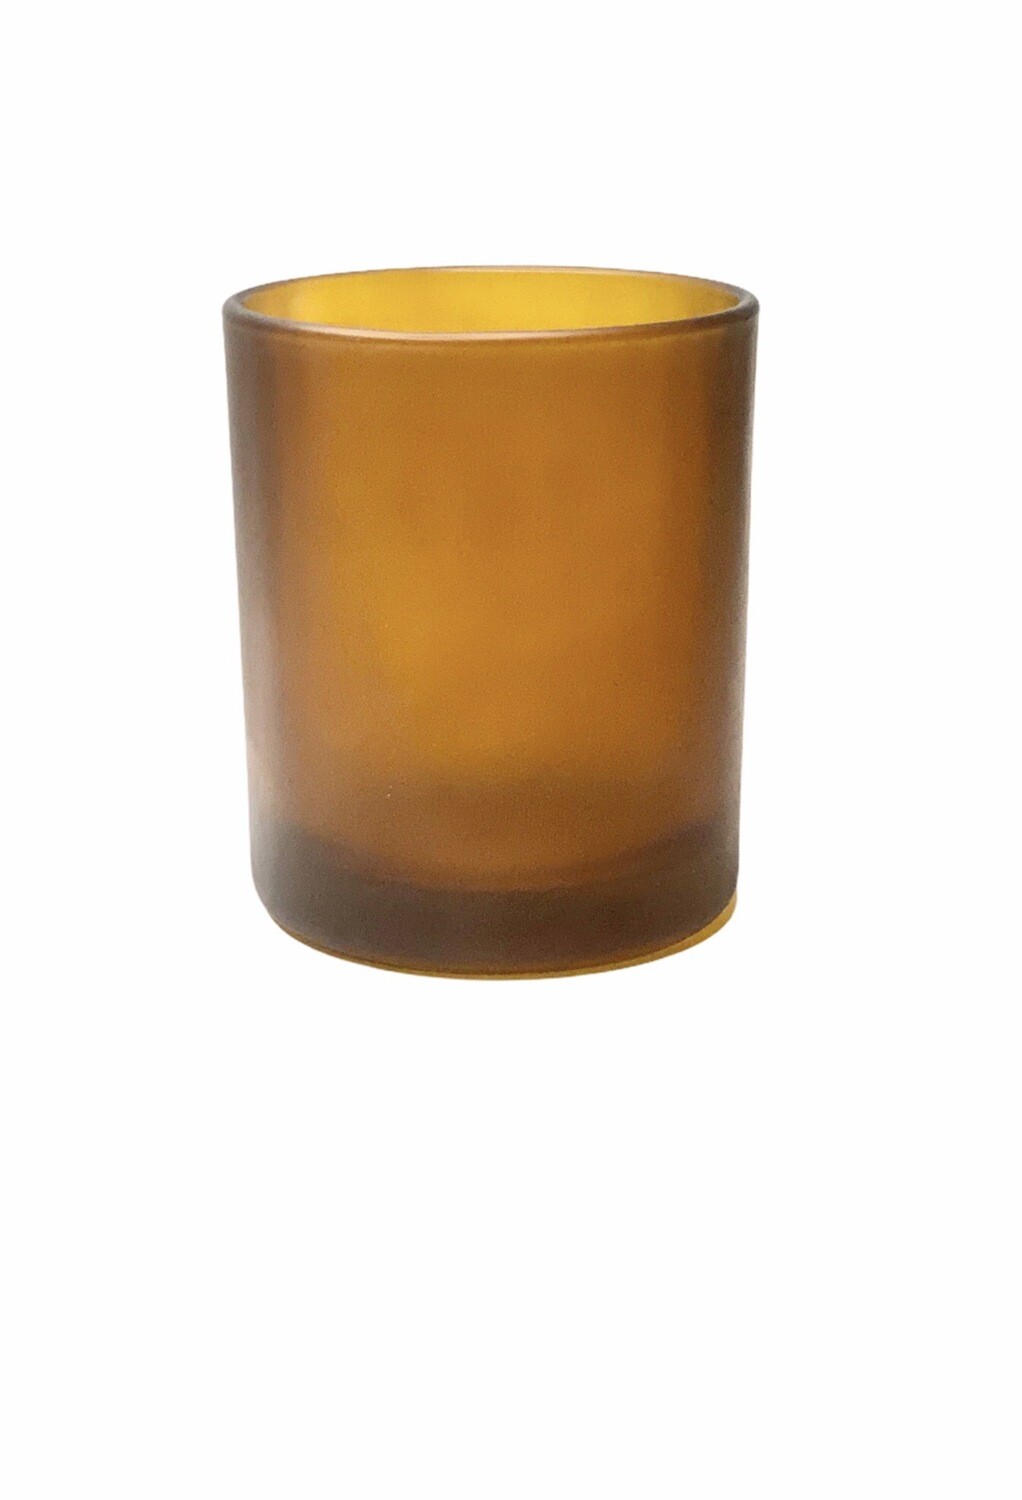 150ml Glass Frosted Amber Candle Jar